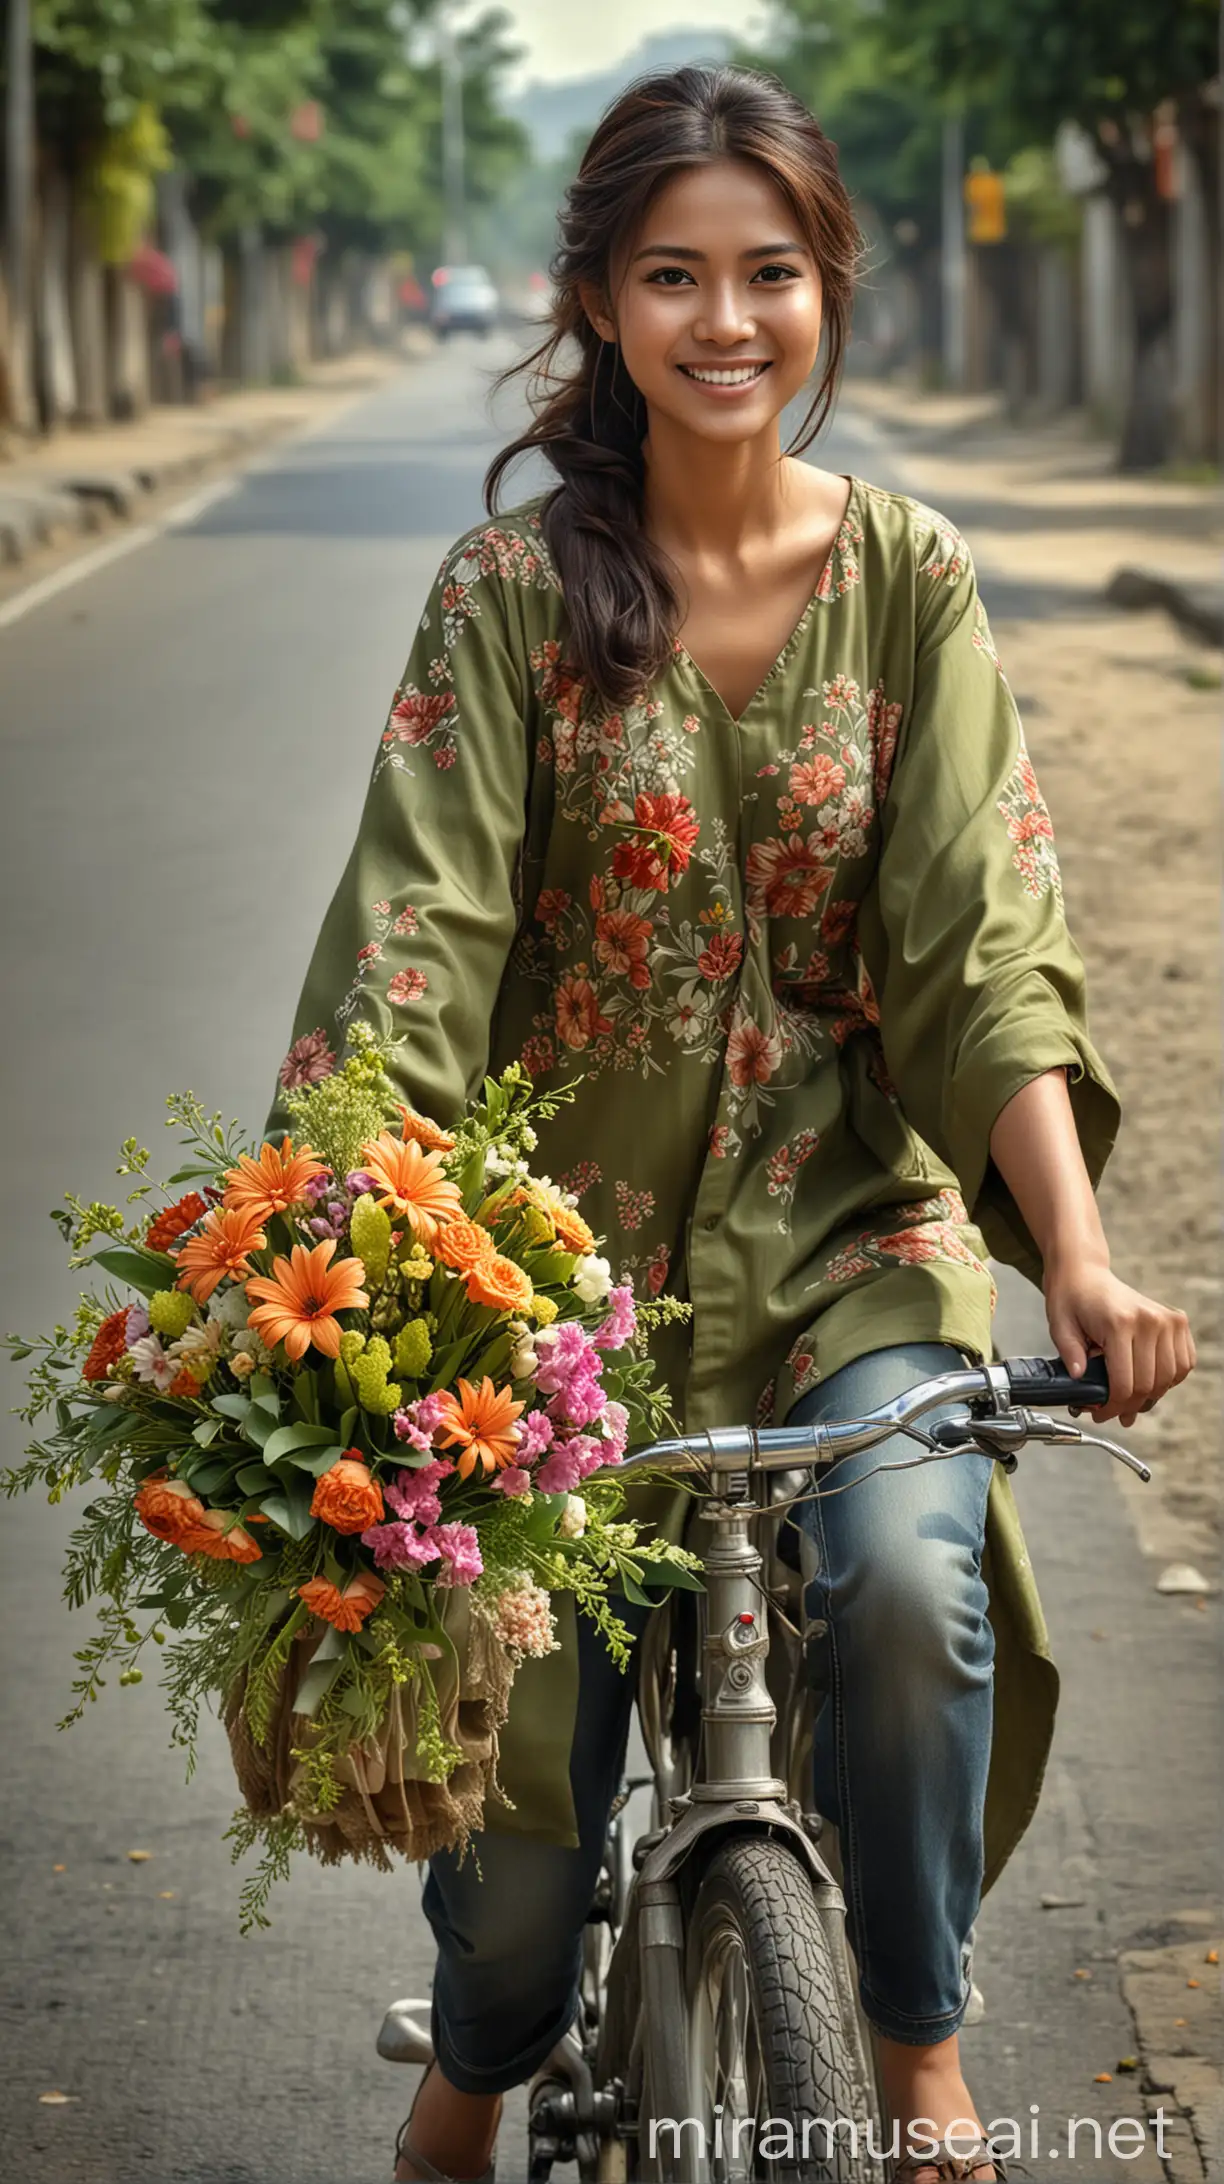 Pretty Indonesian Woman Riding Bike with Bouquet of Flowers in HDR Realism